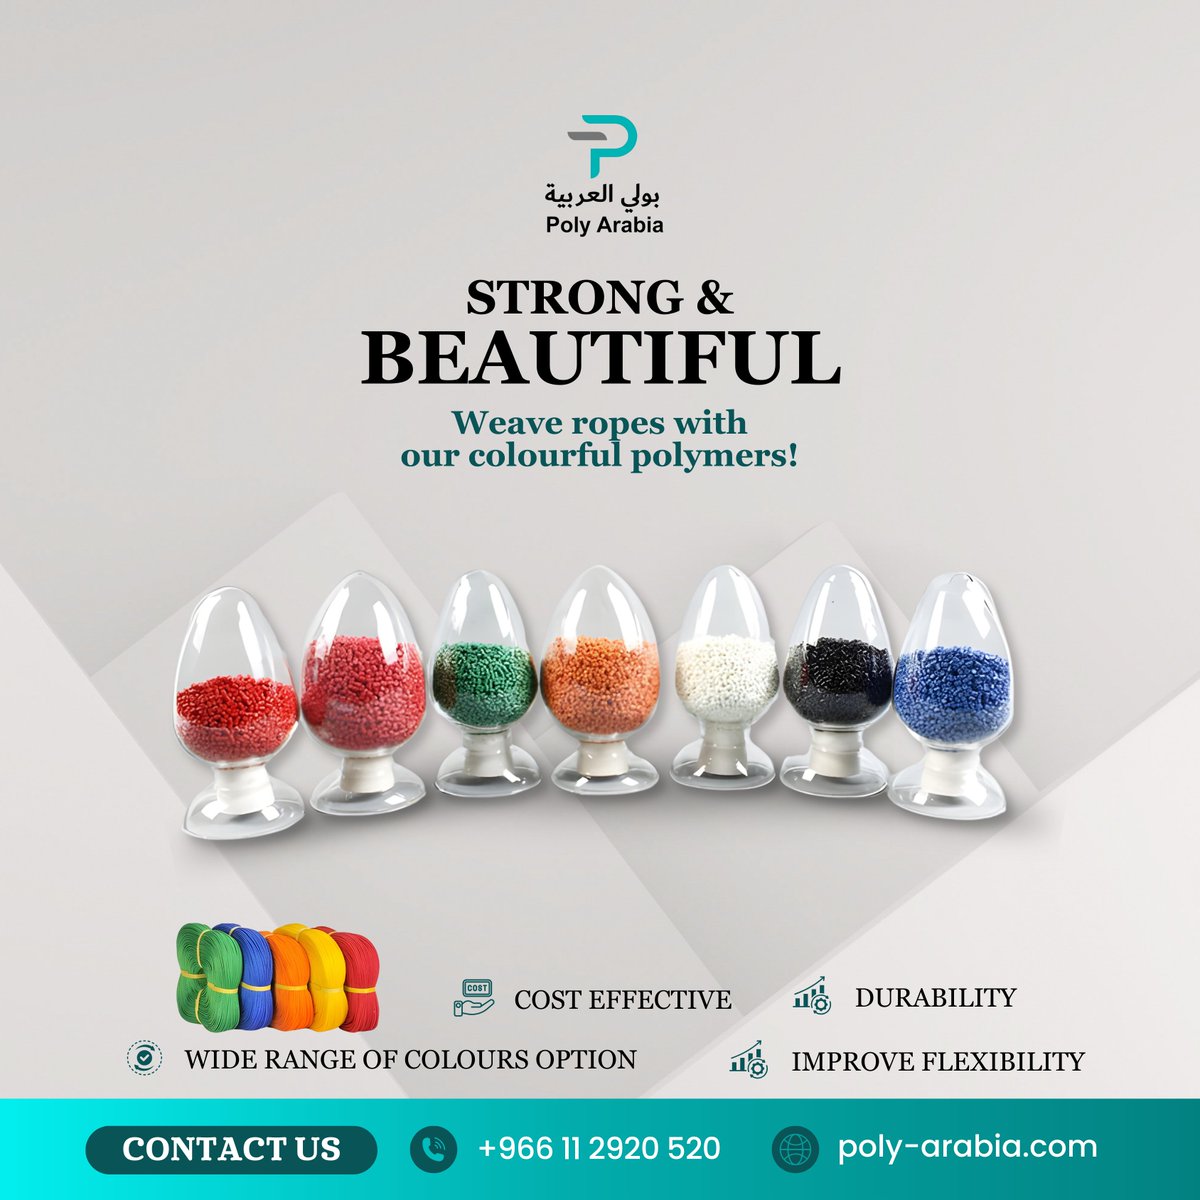 Strong & Beautiful
weave ropes withour colourful polymers!
Our Services :-
> Polymer Supplies
> Marketing & Distribution
> Supply chain Services
> Financial Services etc.
#PolyArabia #PlasticInnovation #RawMaterials #SustainablePlastics #InnovateWithPolyArabia #PlasticSolutions